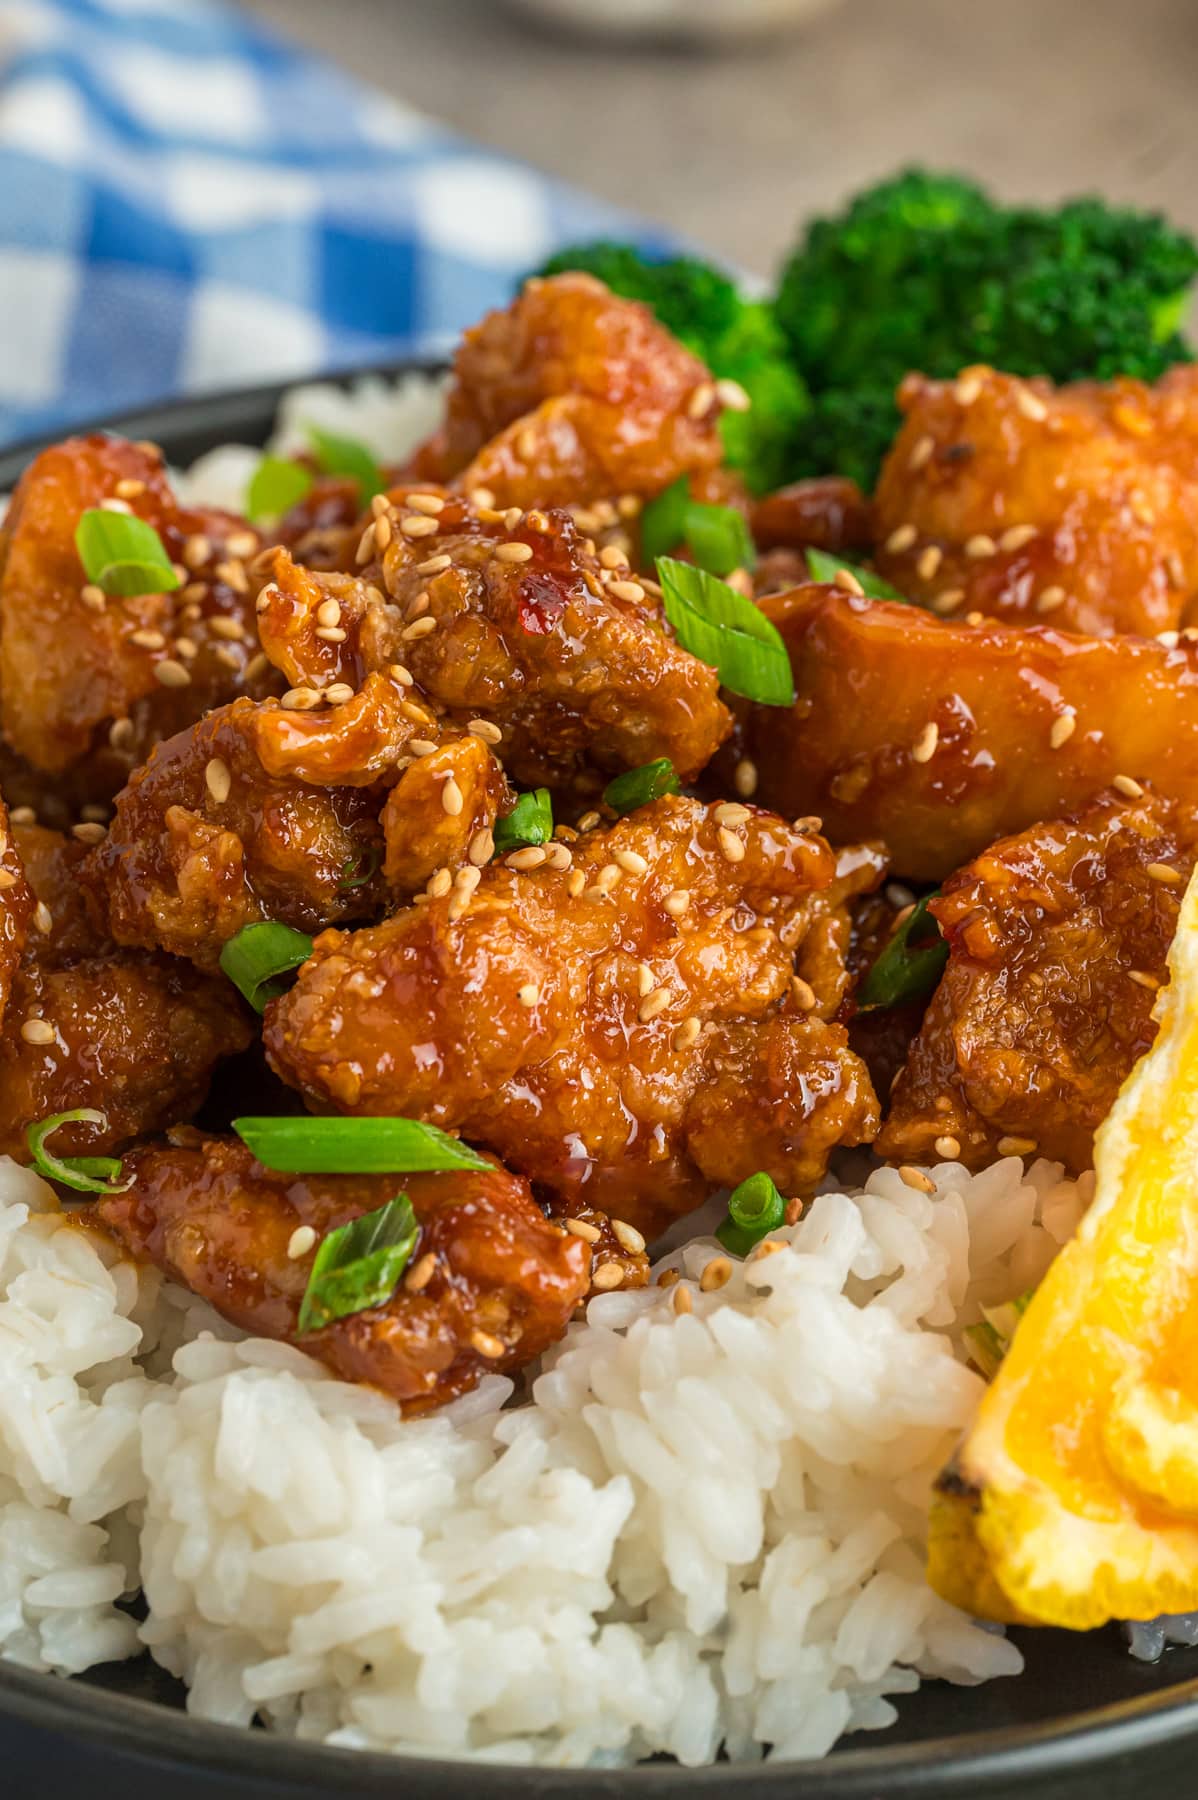 Orange chicken garnished with green onions on top of white rice.